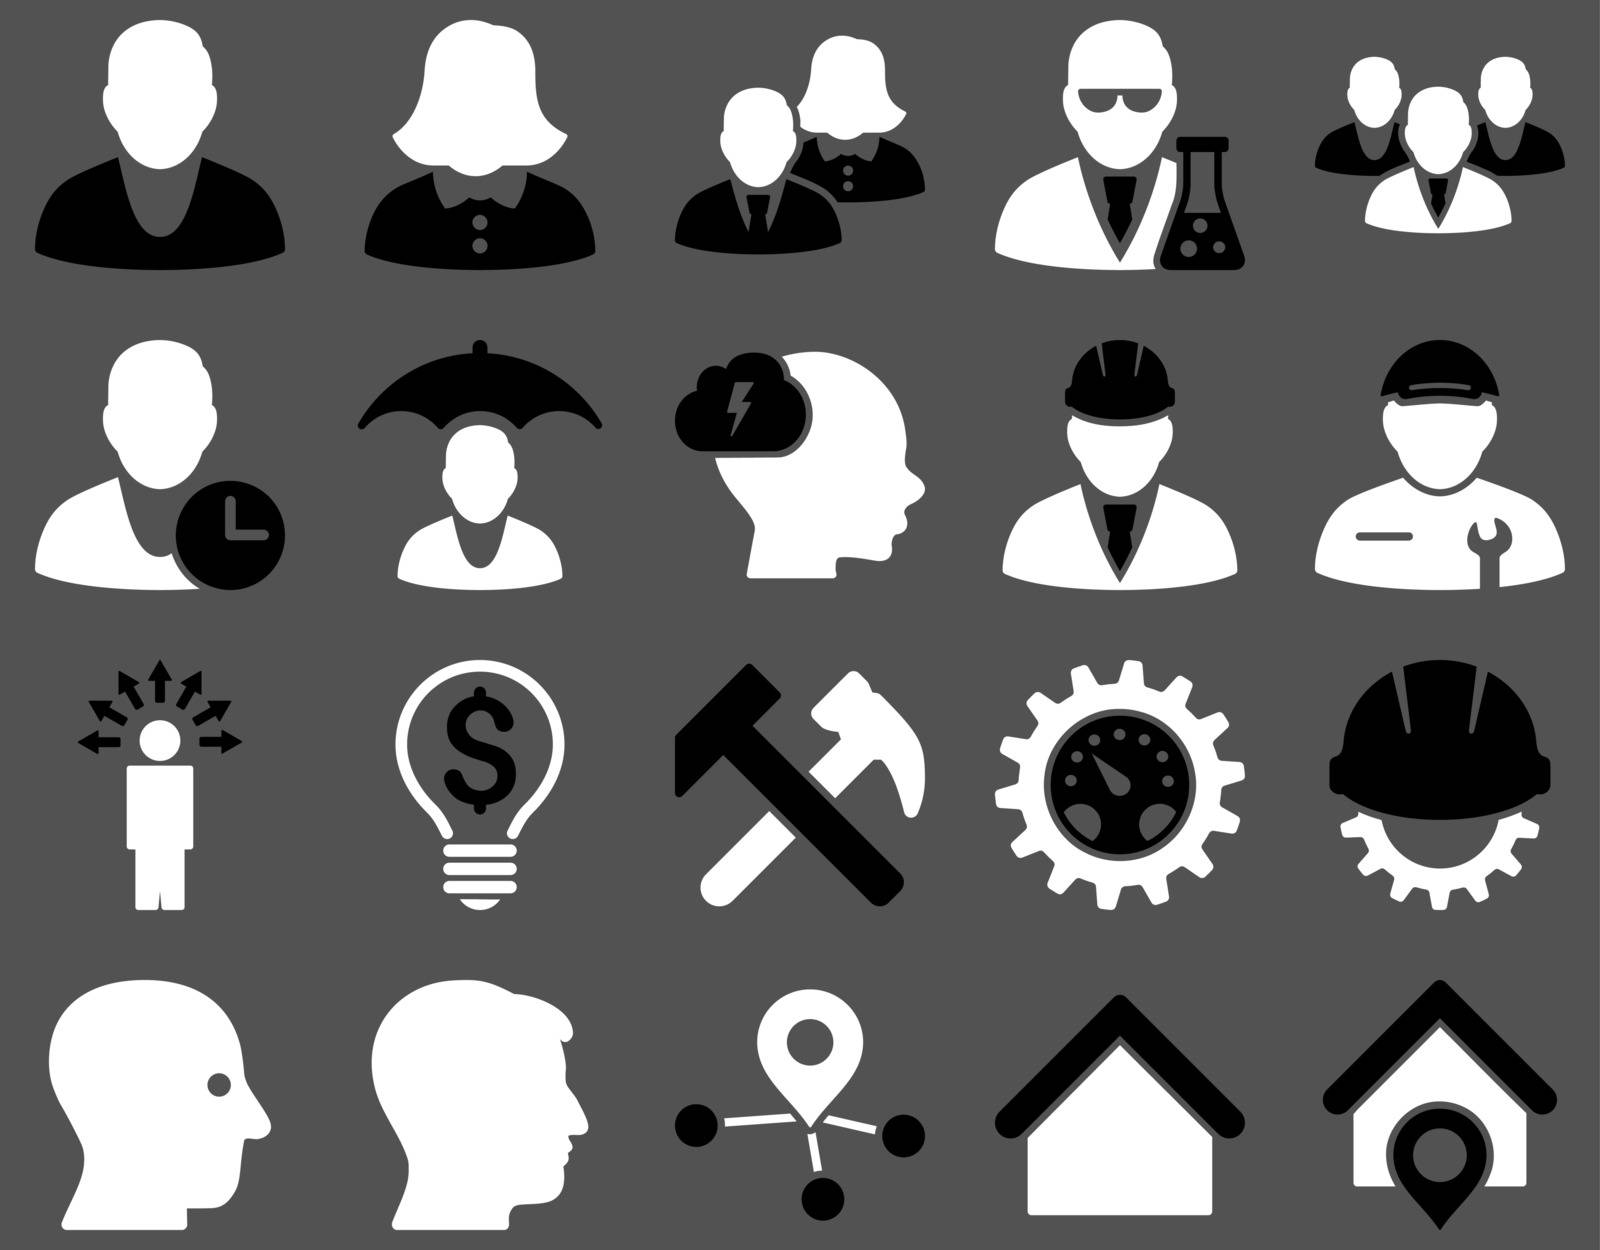 Client and business icon set. These flat bicolor icons use black and white colors. Images are isolated on a gray background. Angles are rounded.